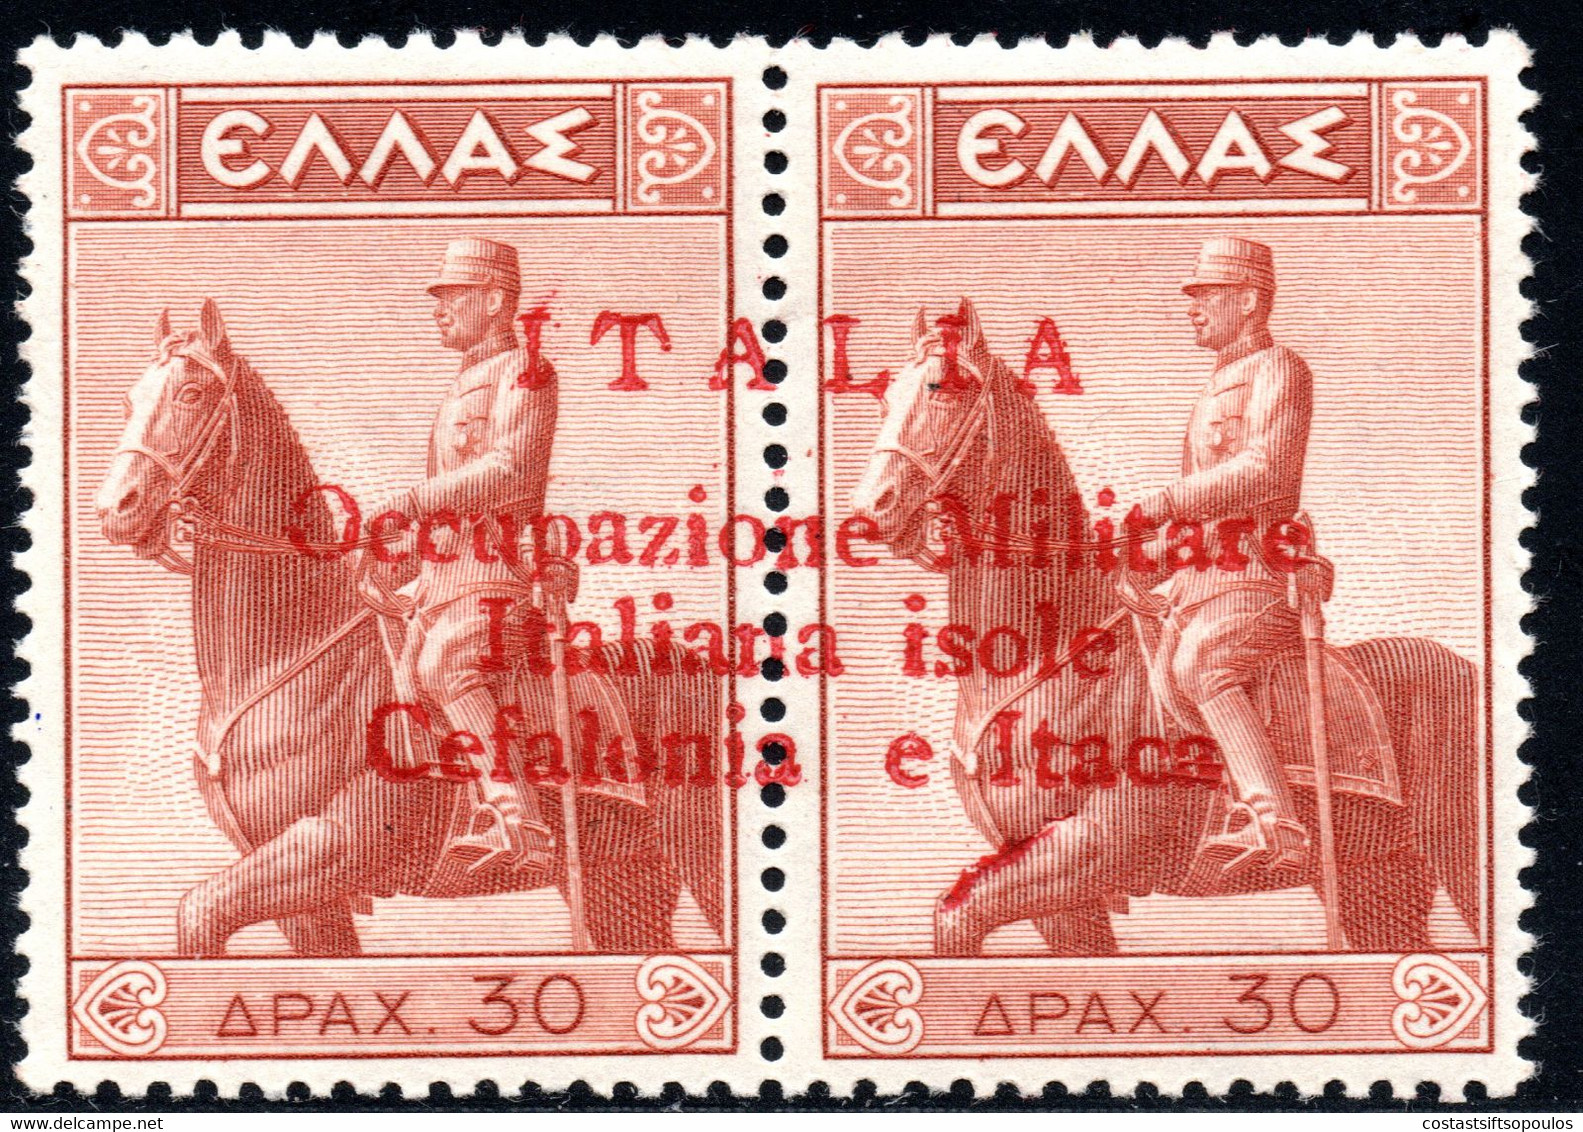 165.GREECE,ITALY,IONIAN,CEFALONIA,1941 30DR.RIDER,RED OVERPRINT???,MNH,POSSIBLY PRIVATE - Ionian Islands